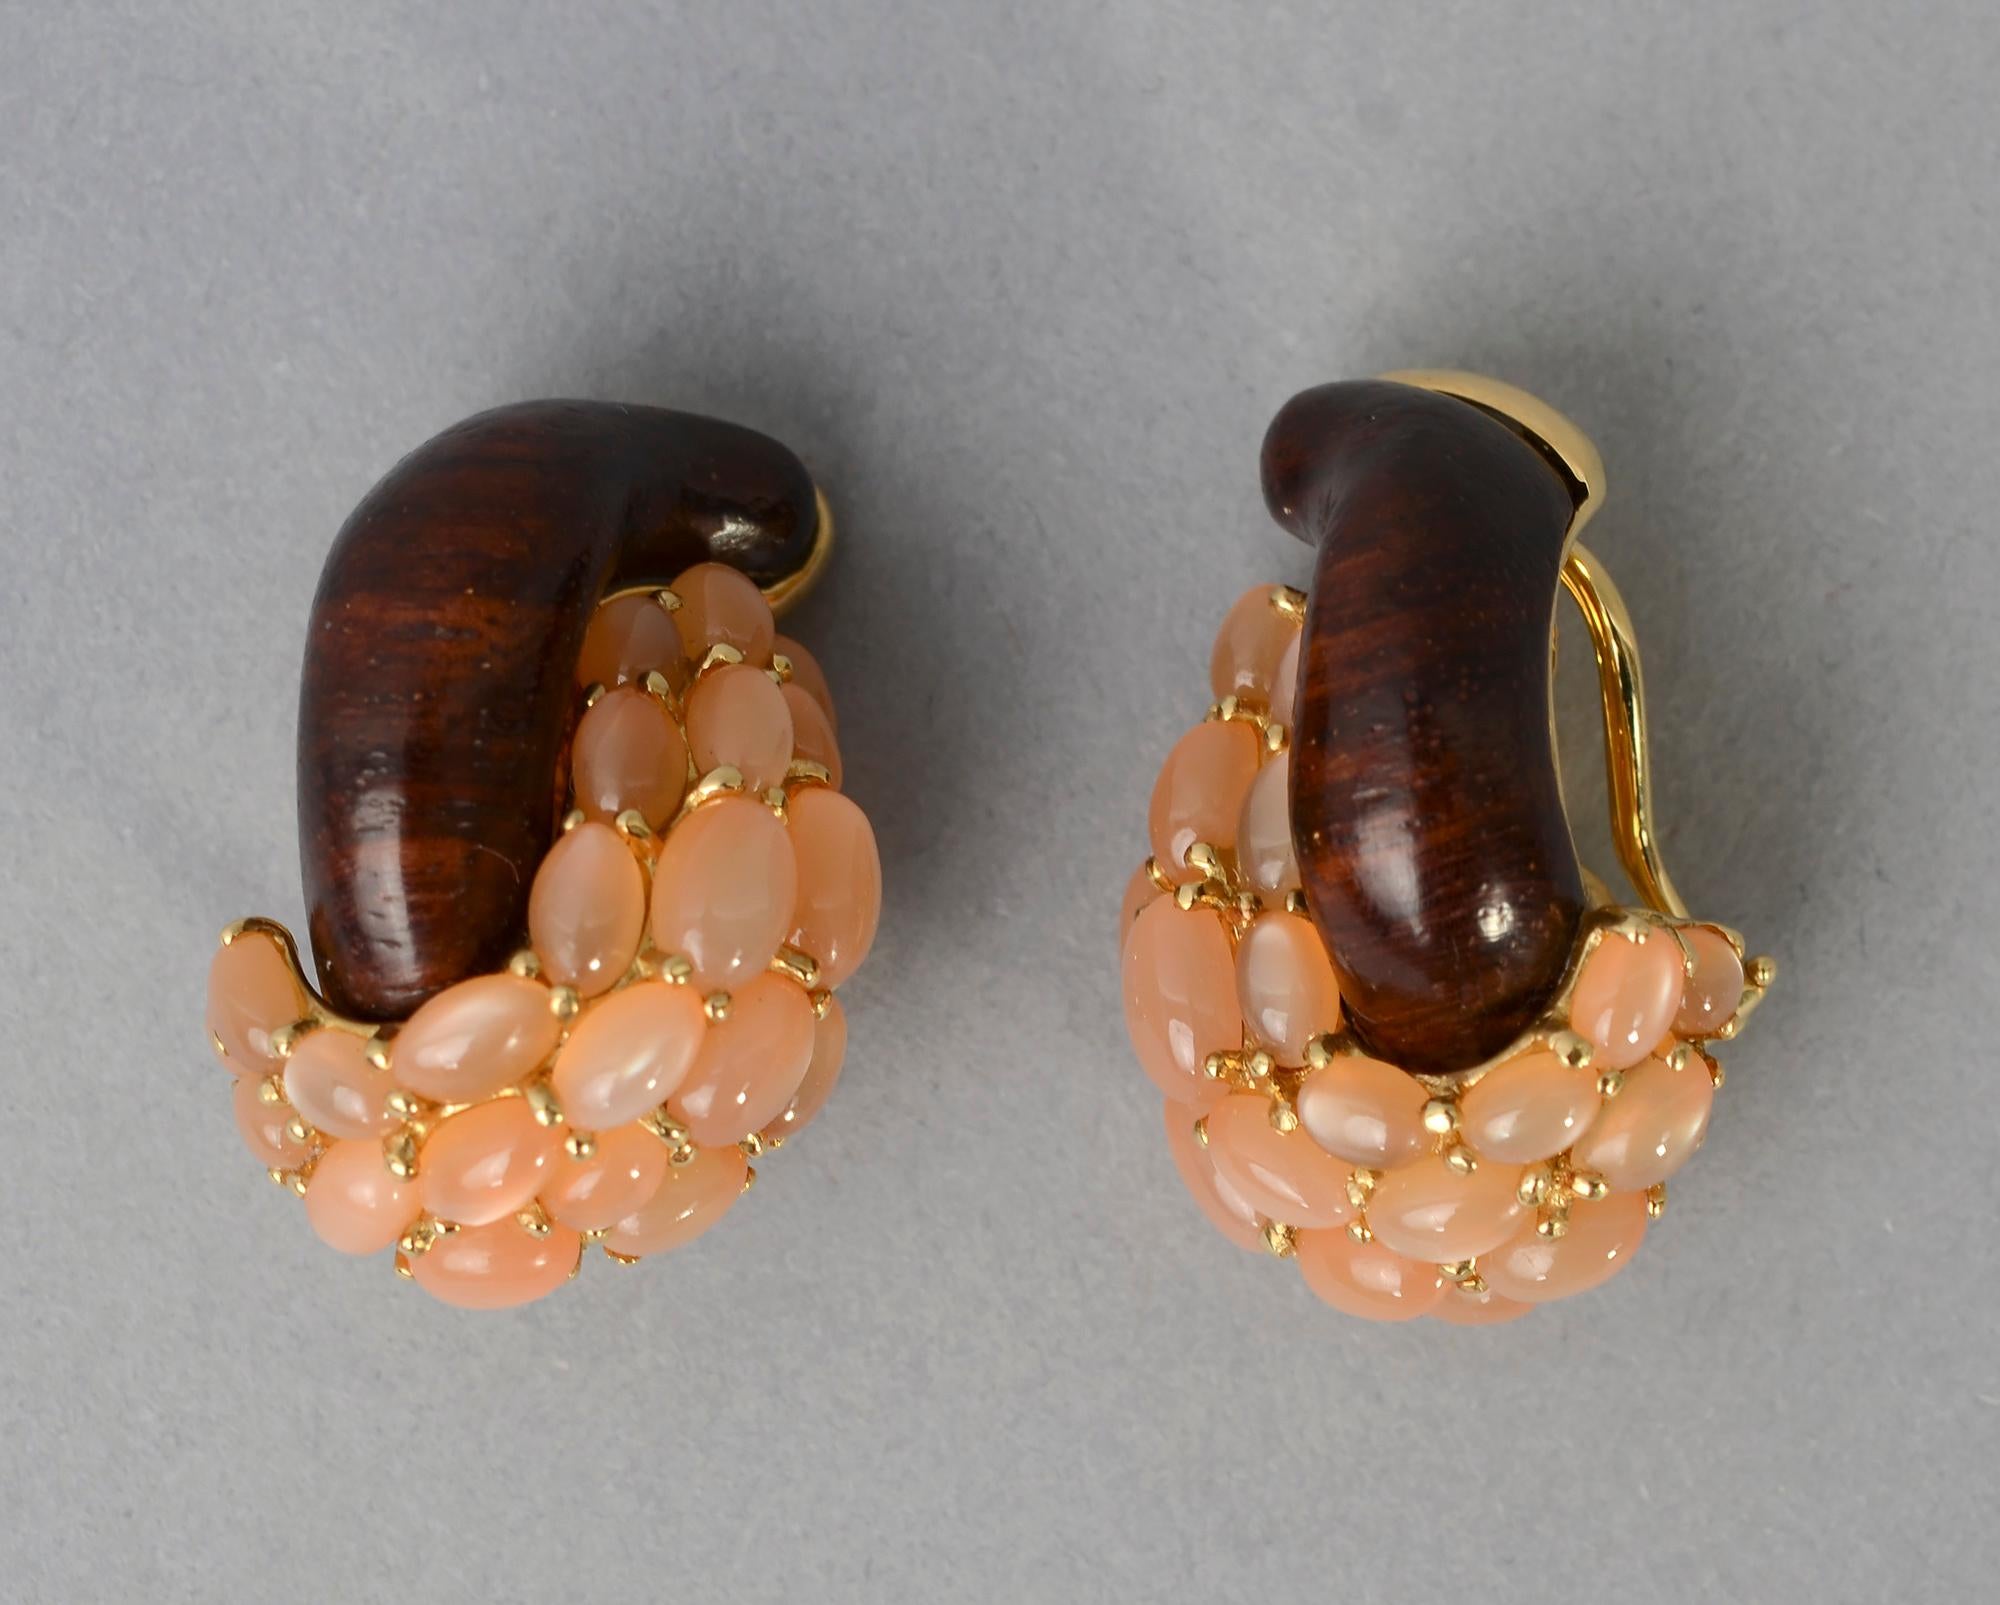 Elegant and unusual pink moonstone and wood (probably ebony) half link earrings by Seaman Schepps.
The pink moonstones are a wonderfully warm color that plays off beautifully with the wood. Clip backs can be converted to posts. 18 karat gold with